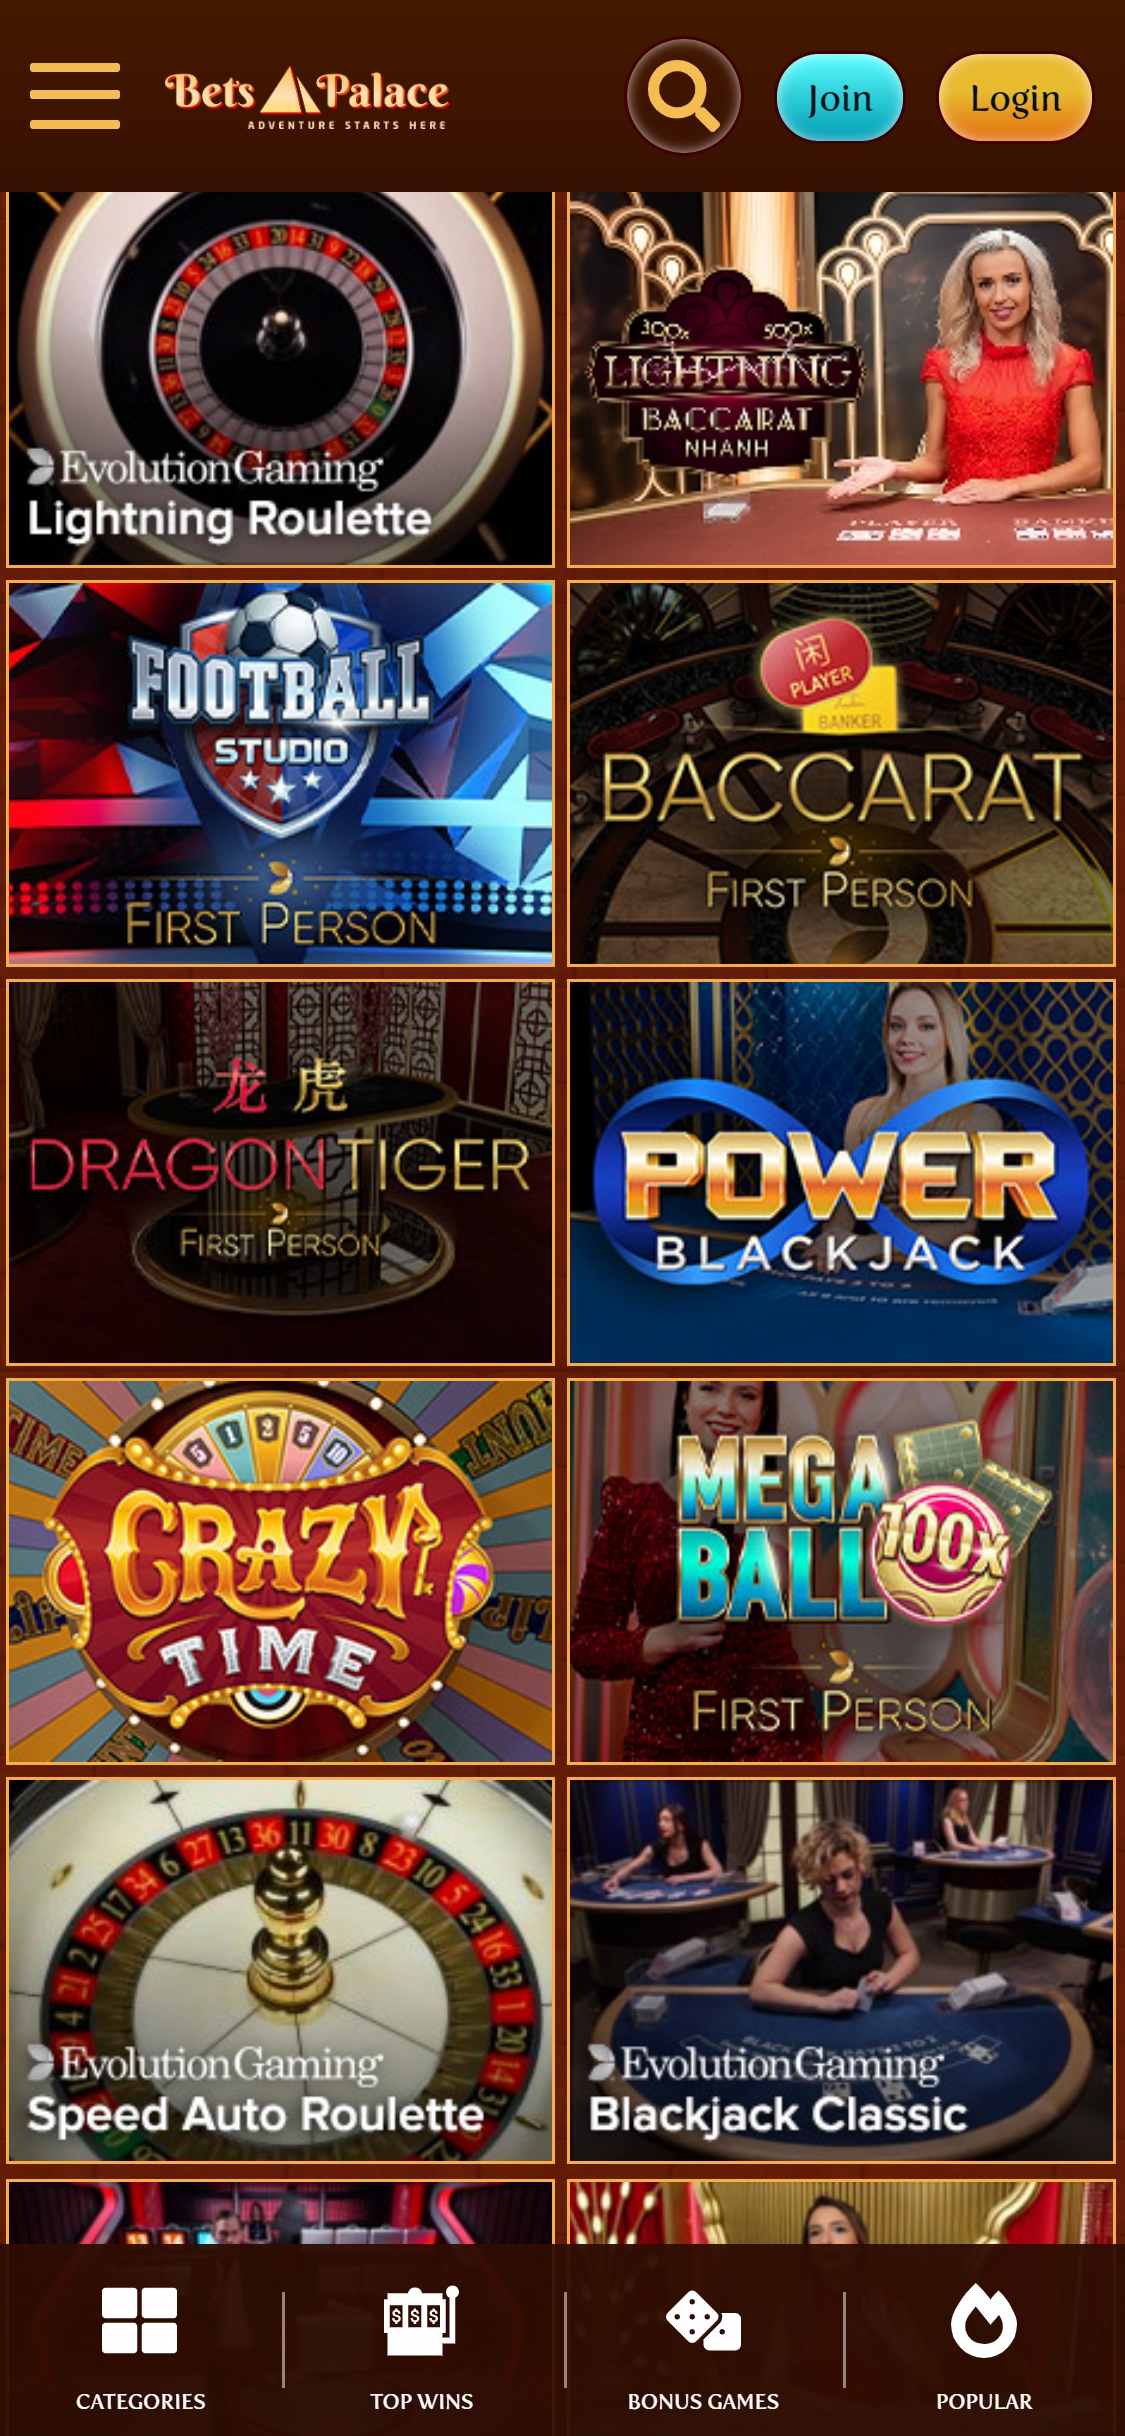 BetsPalace Casino Mobile Live Dealer Games Review